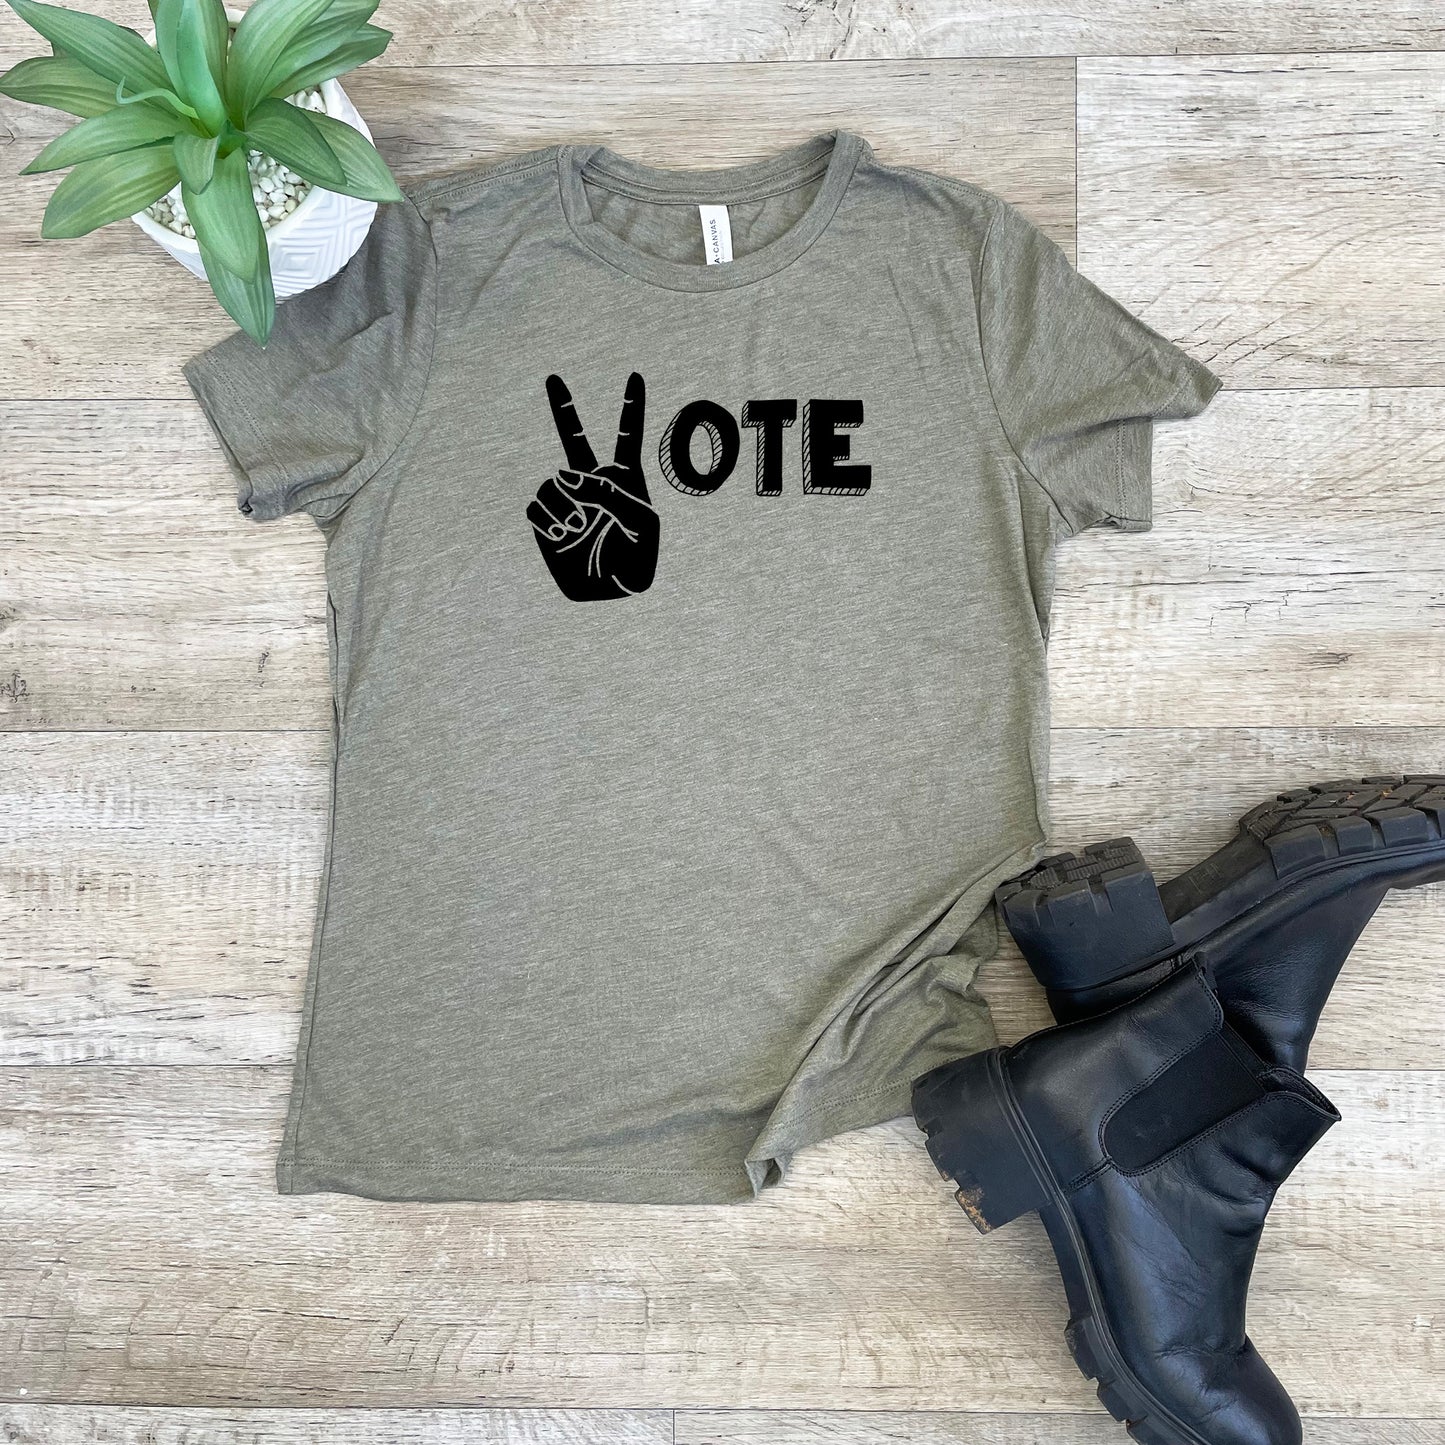 Vote - Women's Crew Tee - Olive or Dusty Blue